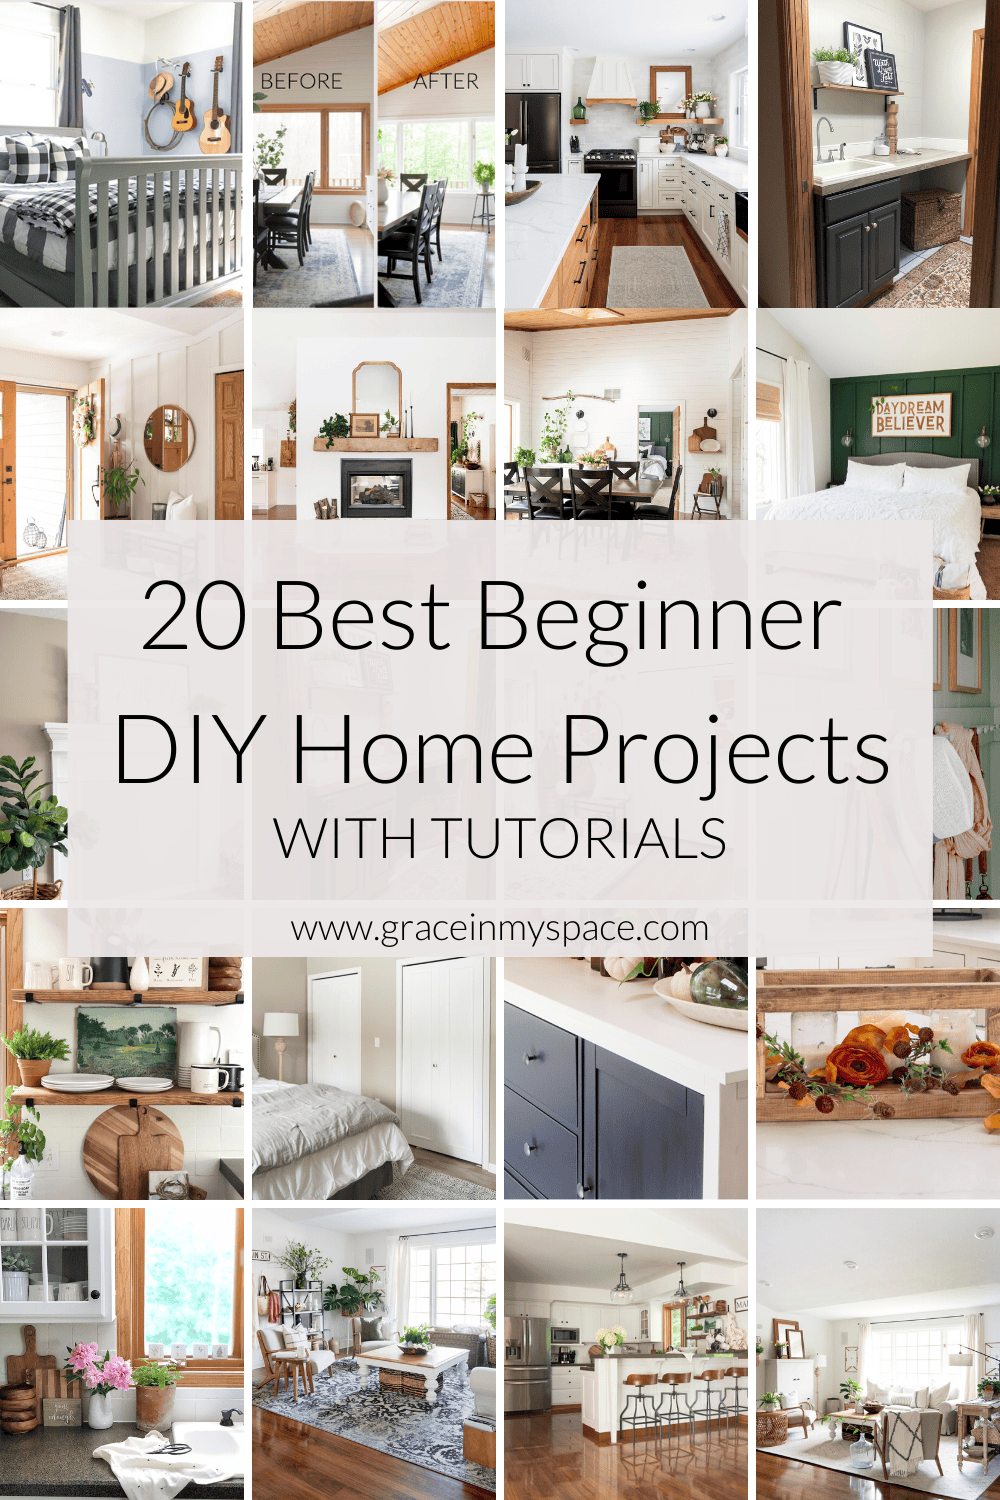 20 DIY Home Projects for Beginners